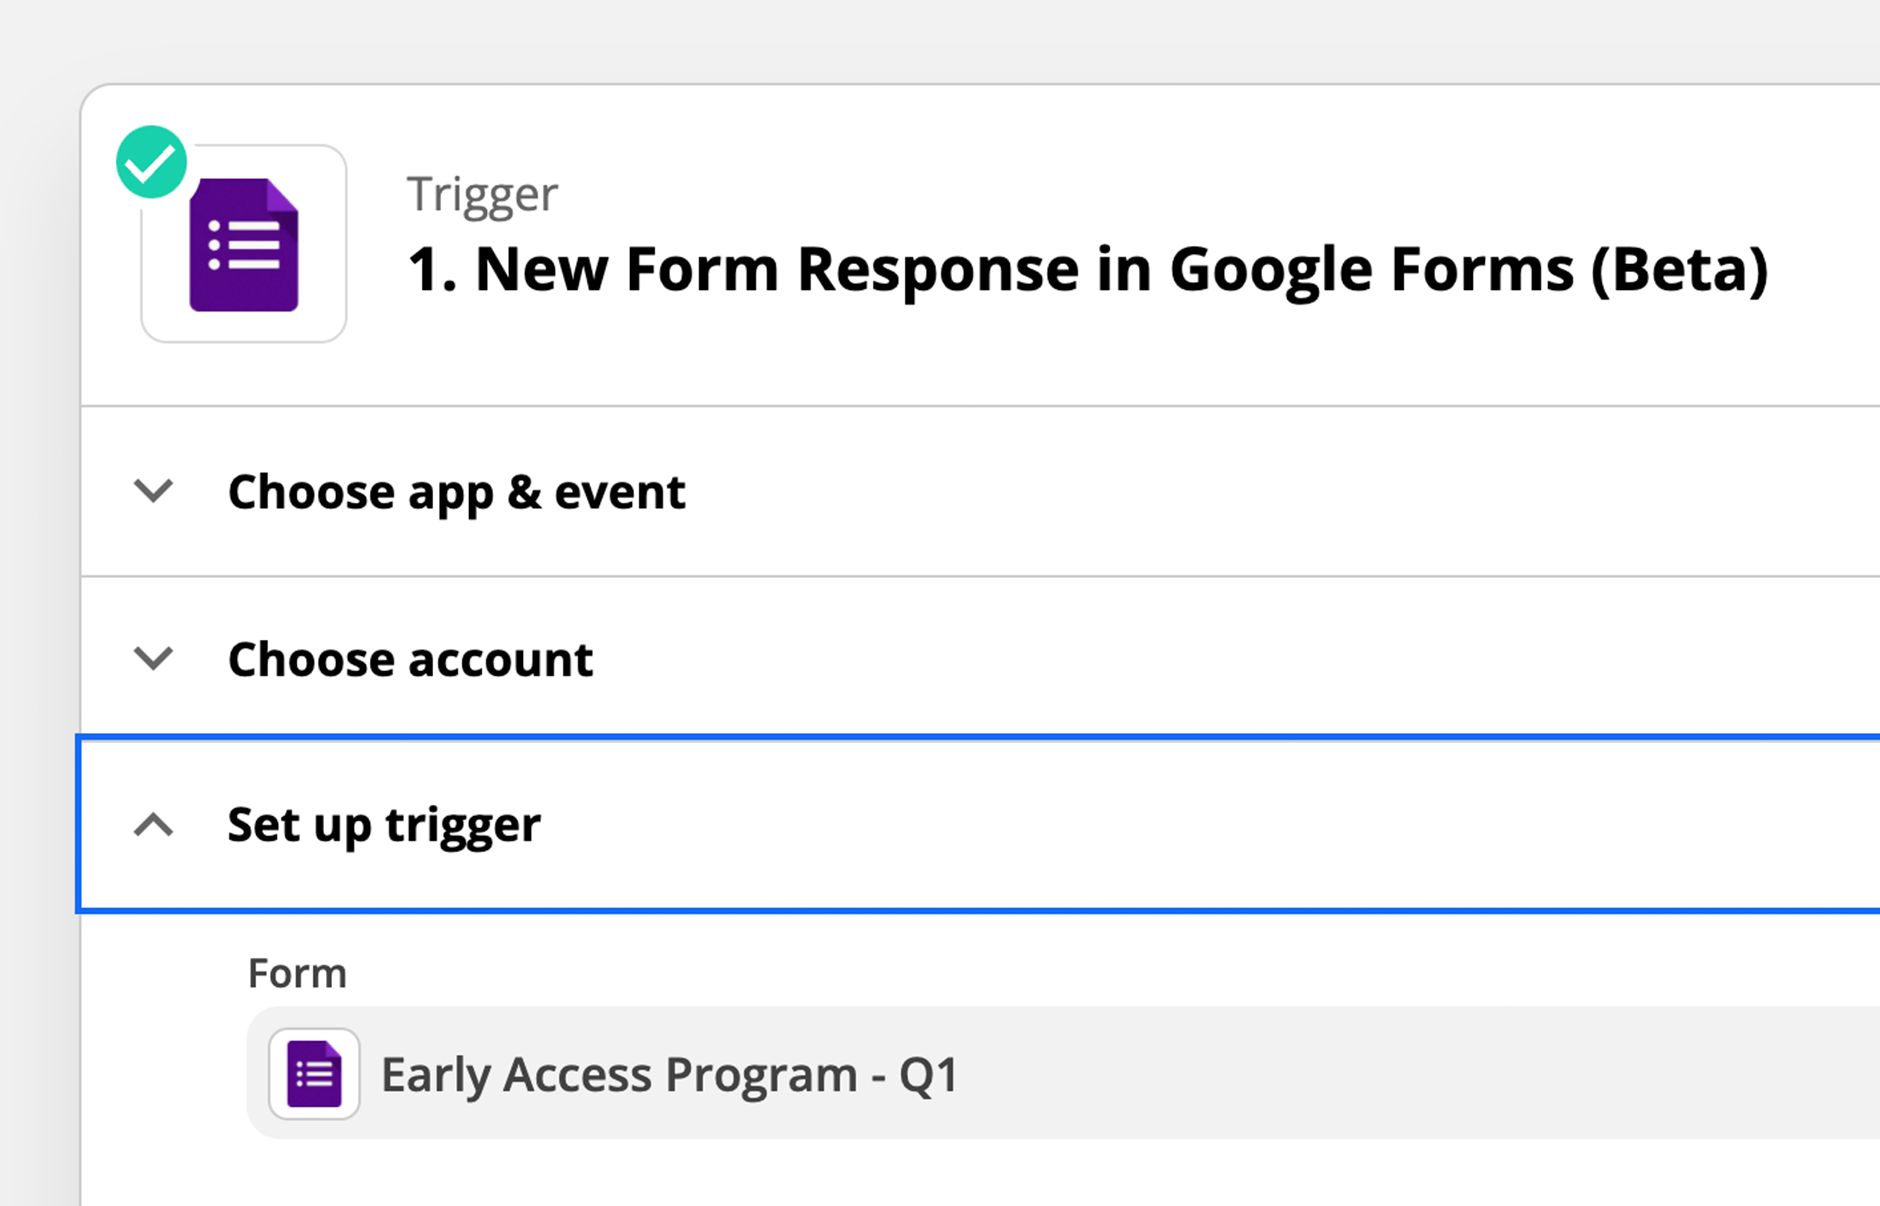 A trigger step is being configured in Zapier, where a specific Google Form is chosen start the automation process